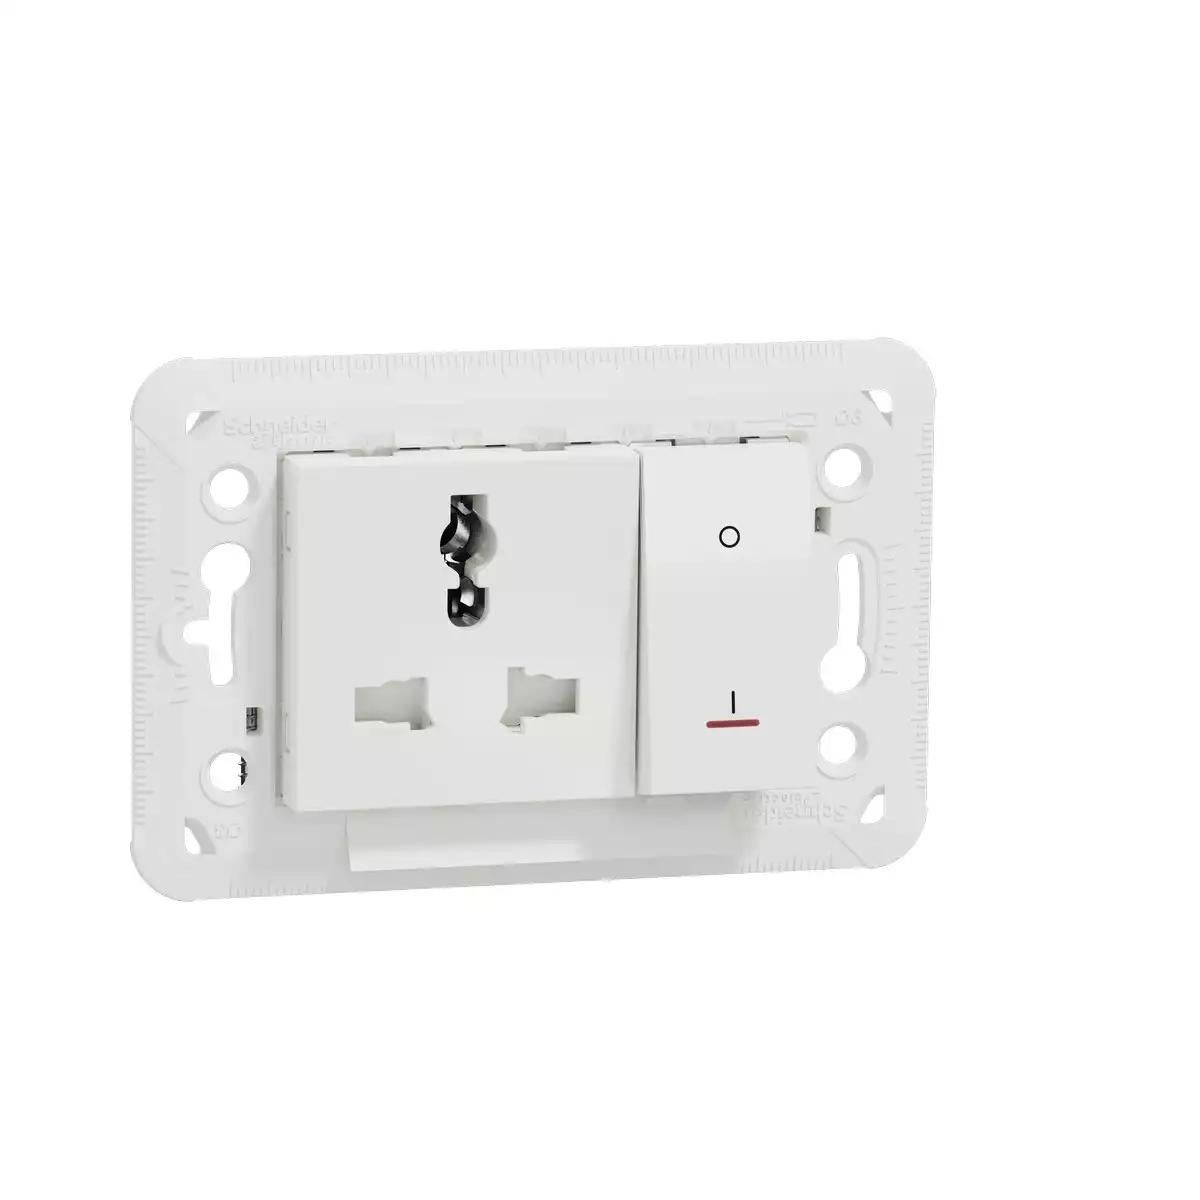 Switch and socket outlet, New Unica, Multistadard with shutter, 2P+E, 13A, 3 modules, white